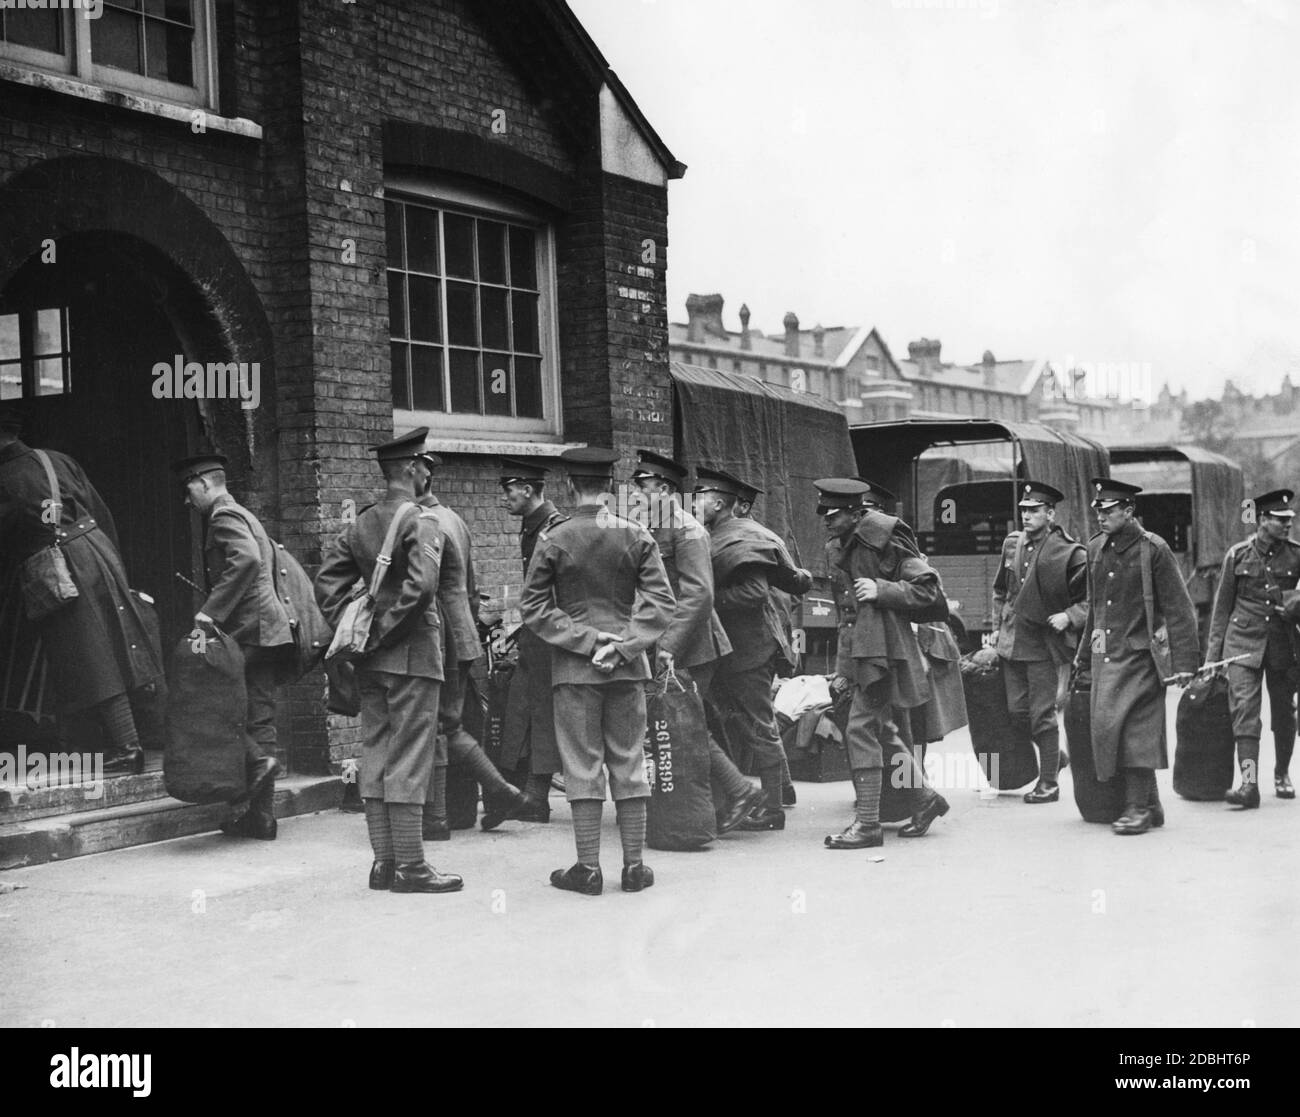 Soldiers of the 1st Battalion Grenadier Guards with equipment enter the London Chelsea Barracks. There they shall prepare for a possible deployment to Czechoslovakia due to the Sudeten crisis. Stock Photo